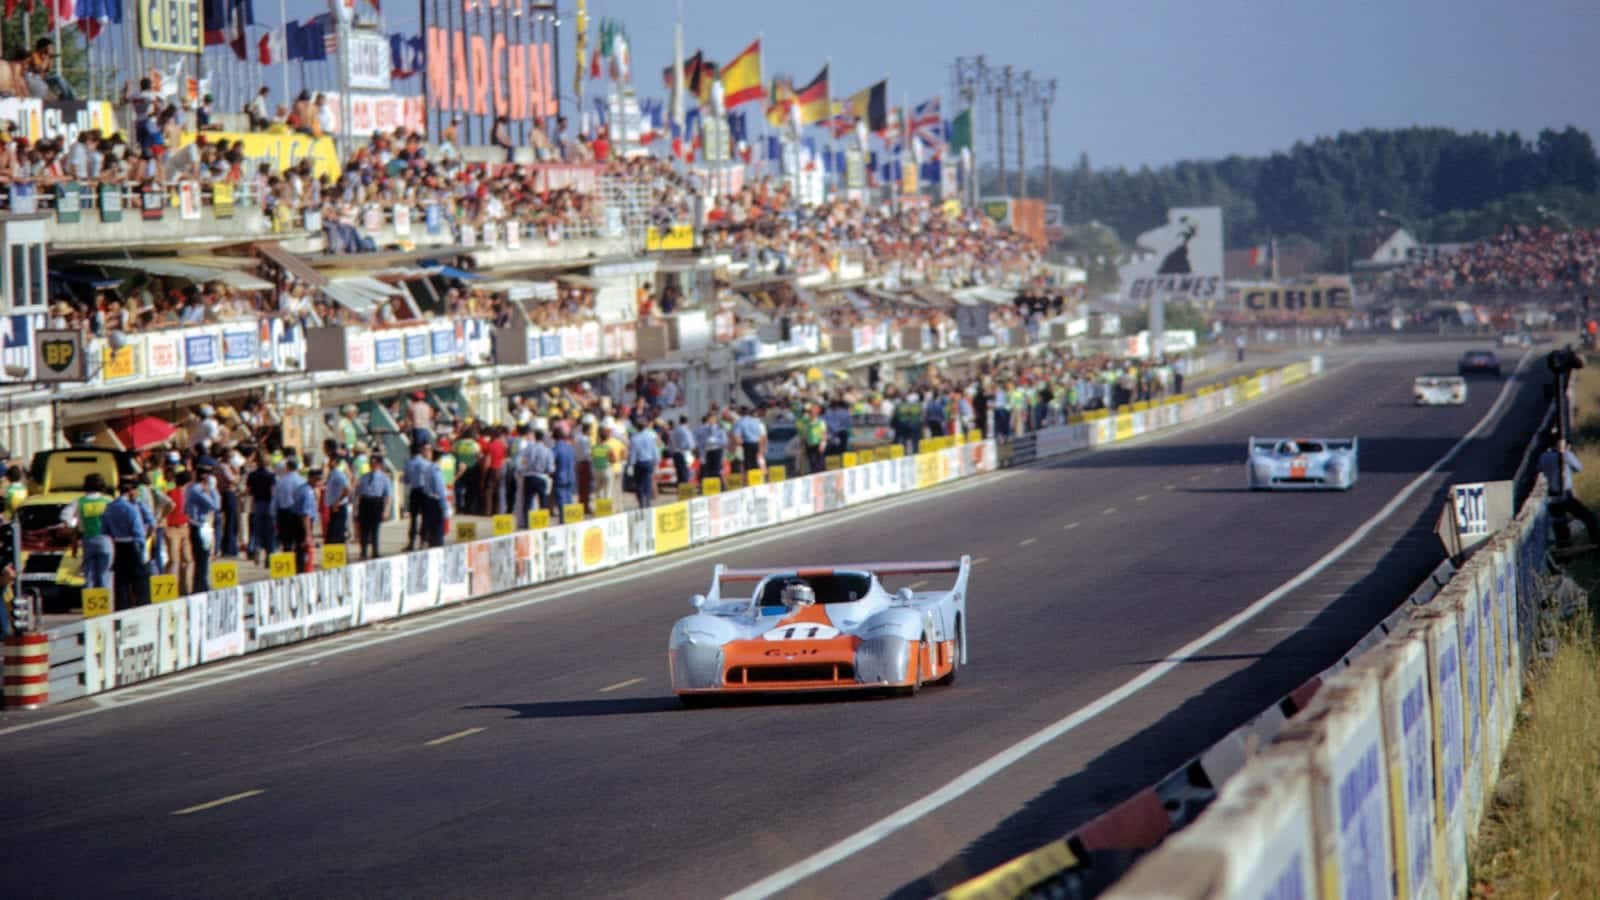 Gulf GR8 Ford of Derek Bell and JAcky Ickx at Le Mans in 1975